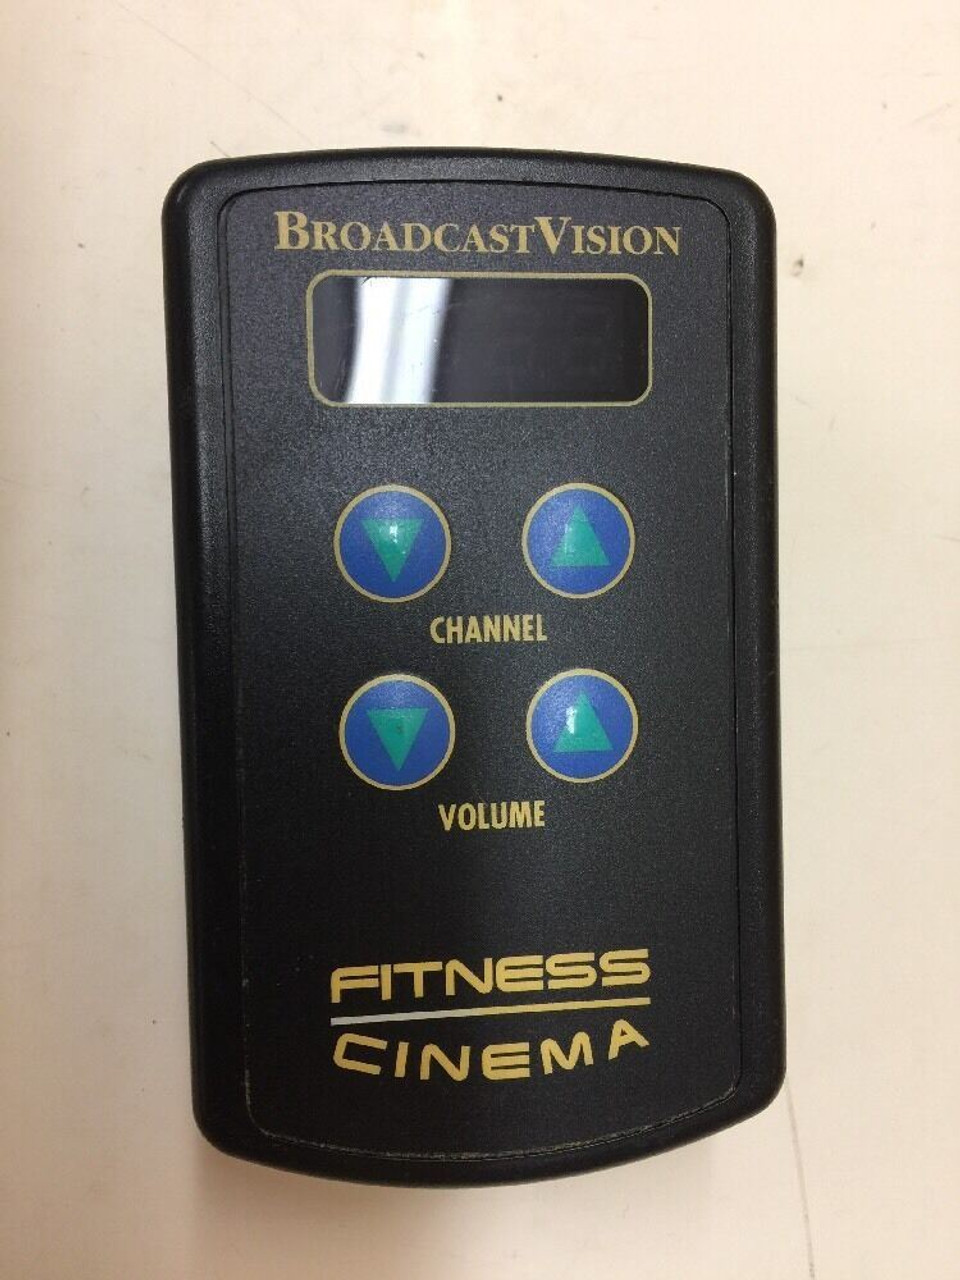 Broadcast Vision Fitness Cinema Equipment Remote with Display